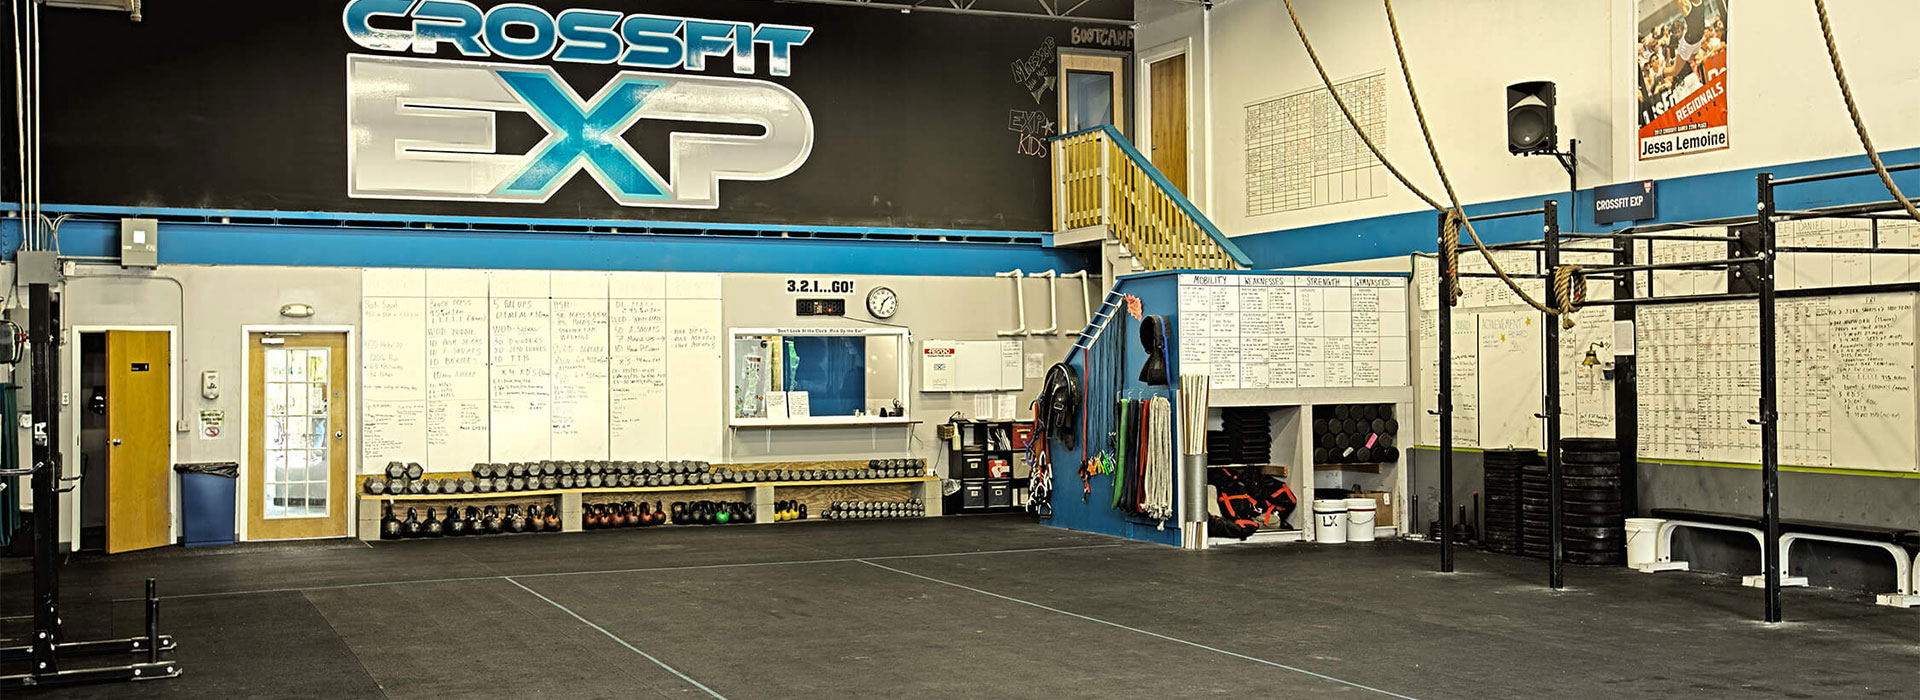 Why CrossFit EXP Is Ranked One of the Best Gyms In Leominster